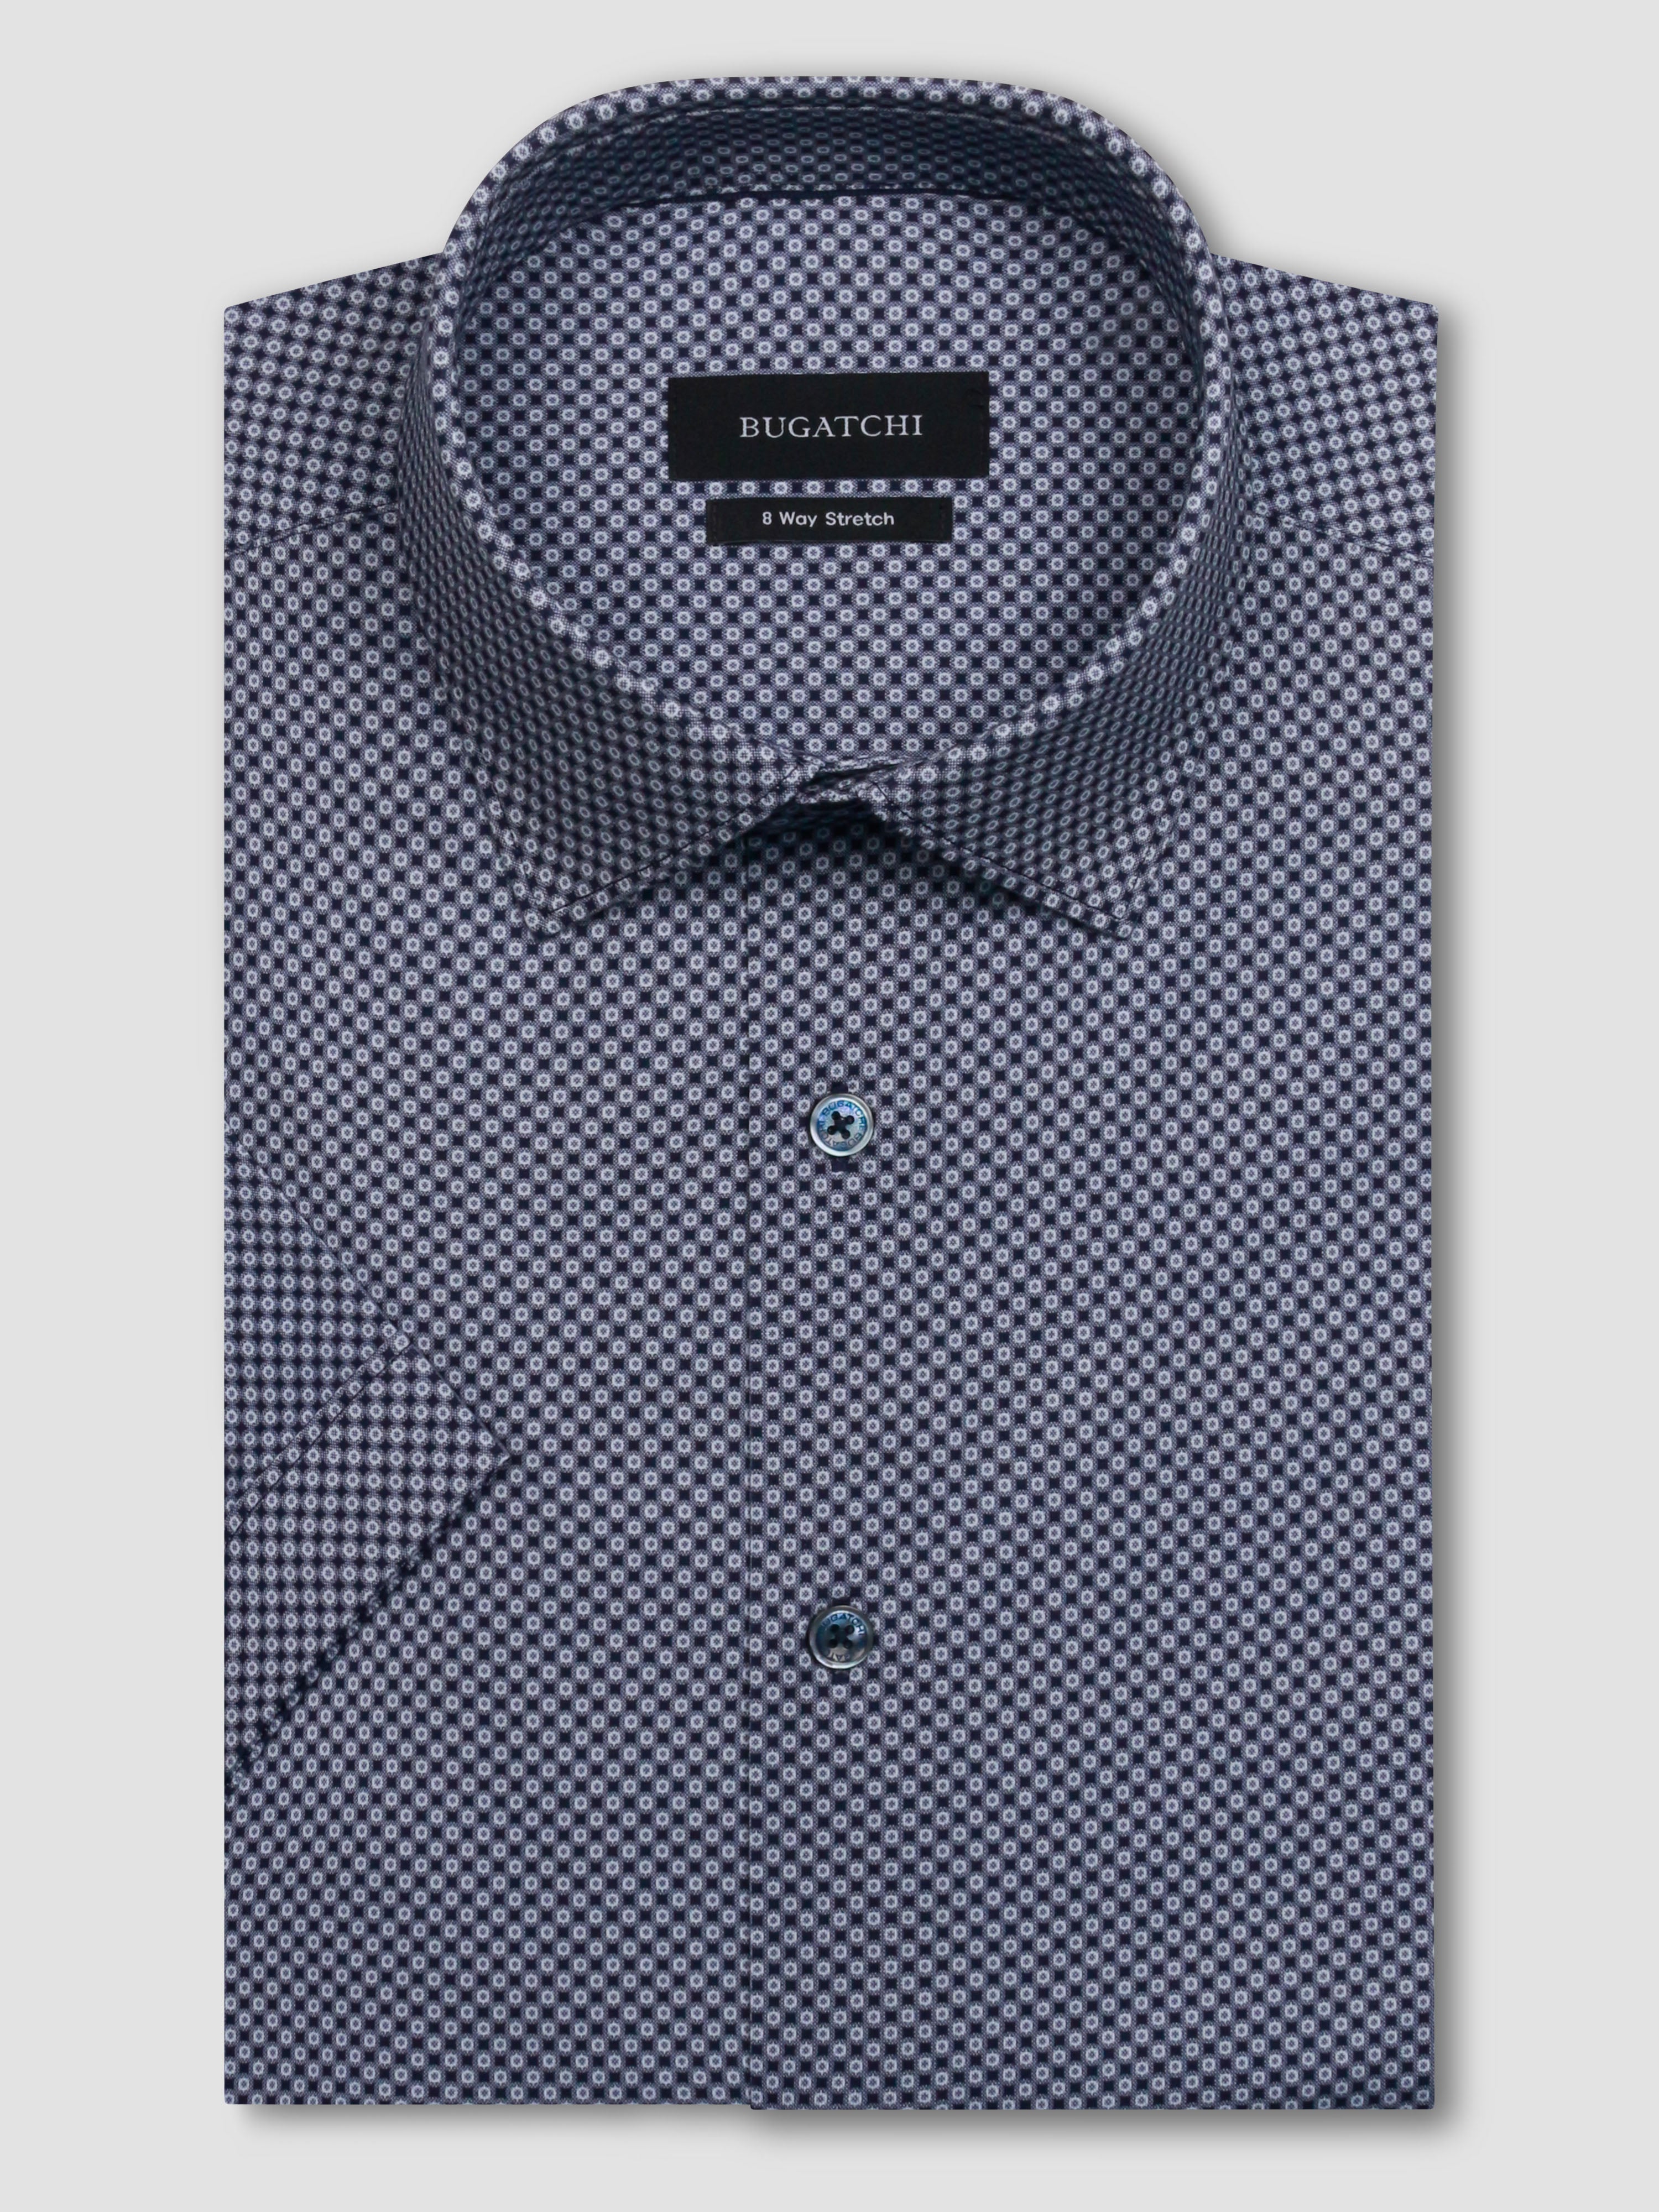 The Miles short-sleeved shirt features a geometric print on OoohCotton fabric, a point collar, genuine shell buttons, and a curved hem. OoohCotton is a double-mercerized, wrinkle-resistant, breathable, and easy-care cotton blend with 8-way stretch, quick-dry, and thermal comfort properties.